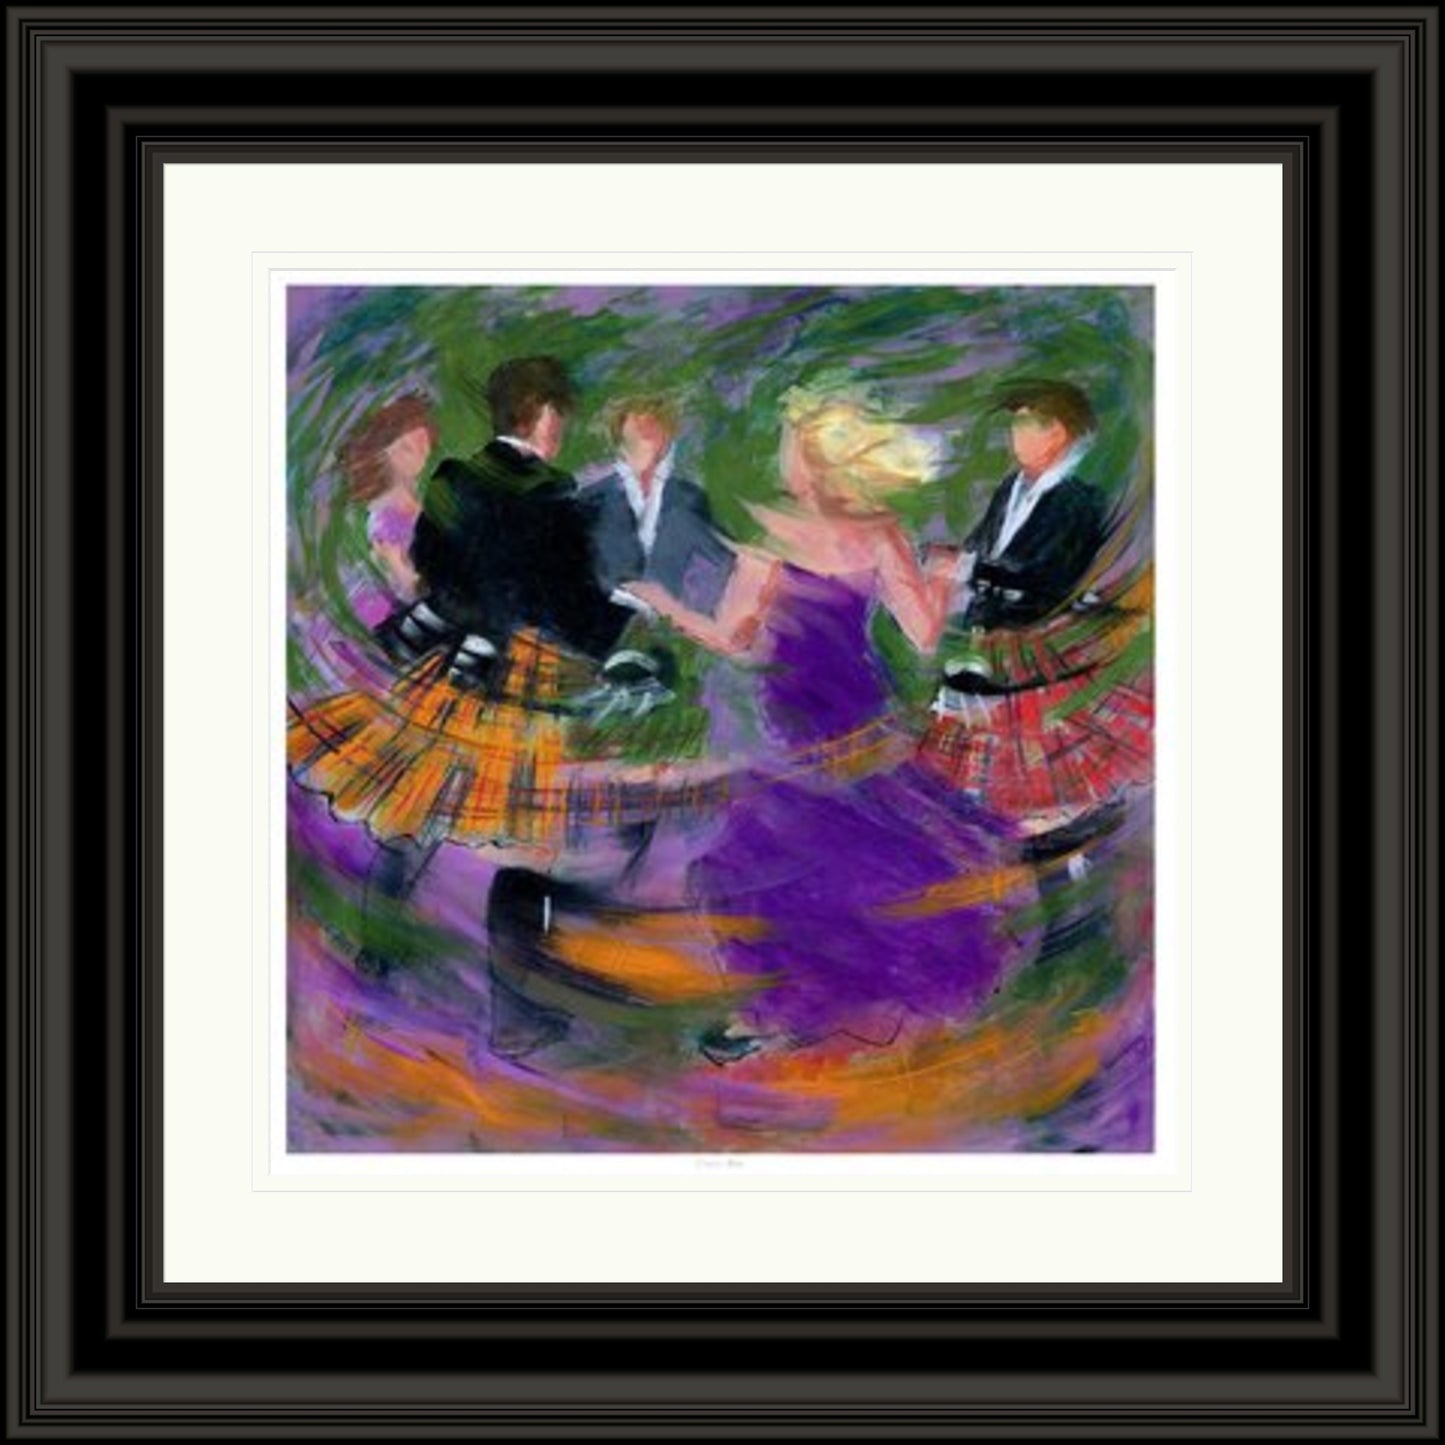 Circling Roon Ceilidh Dancing Art Print by Janet McCrorie